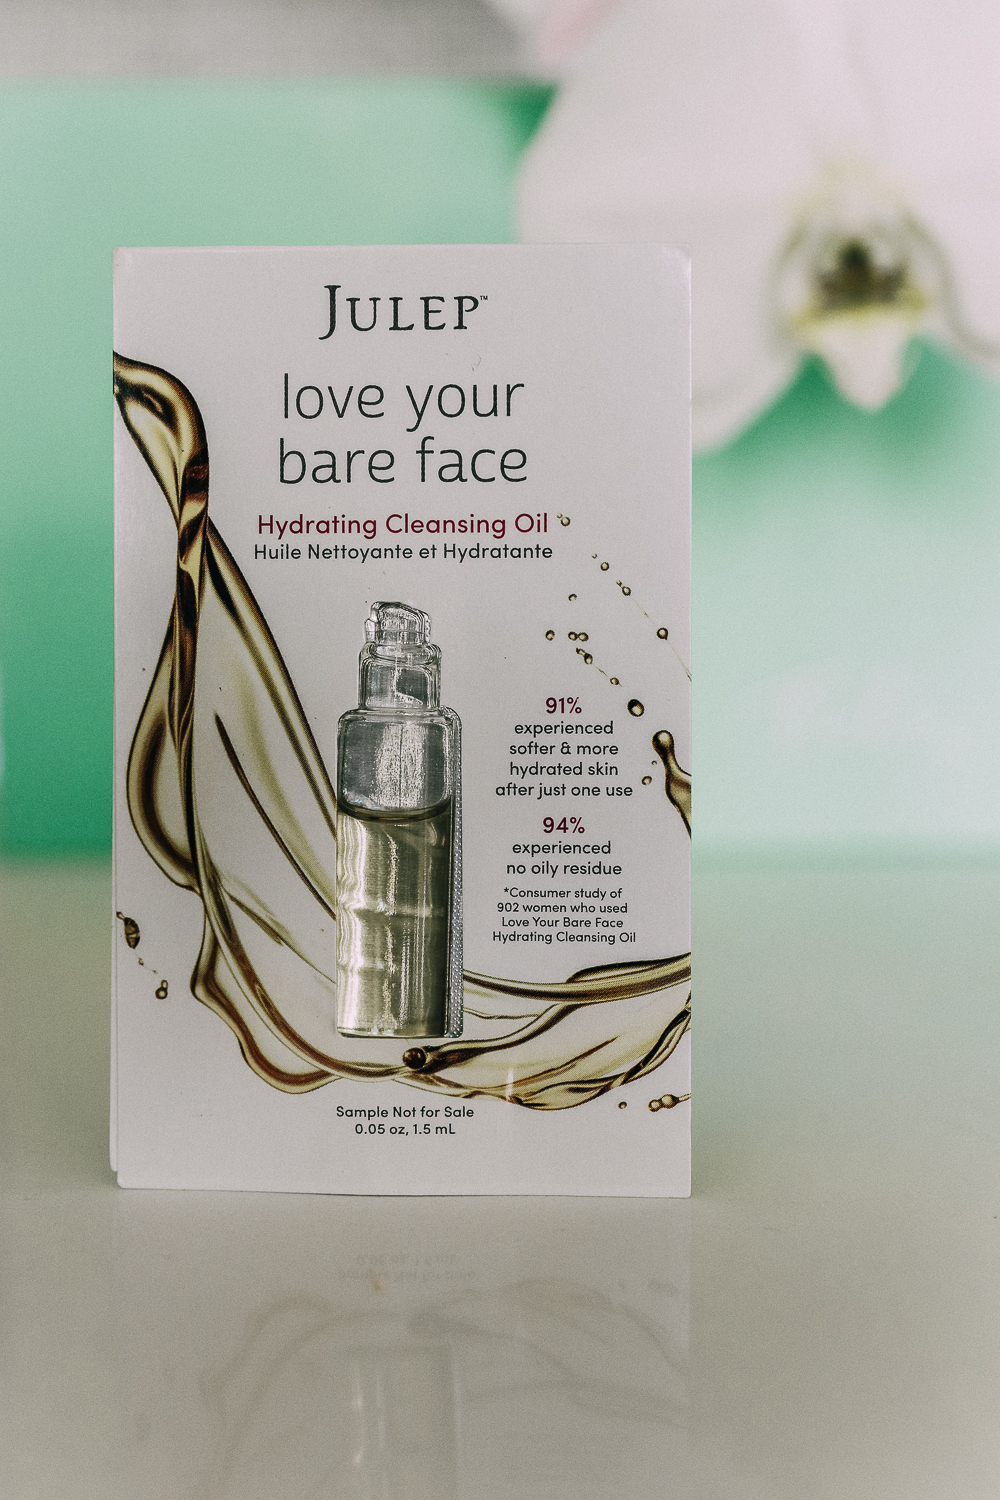 Try It Love It Beauty Box from QVC, featuring Julep love your bare face hydrating cleansing oil, review by beauty blogger over 40 